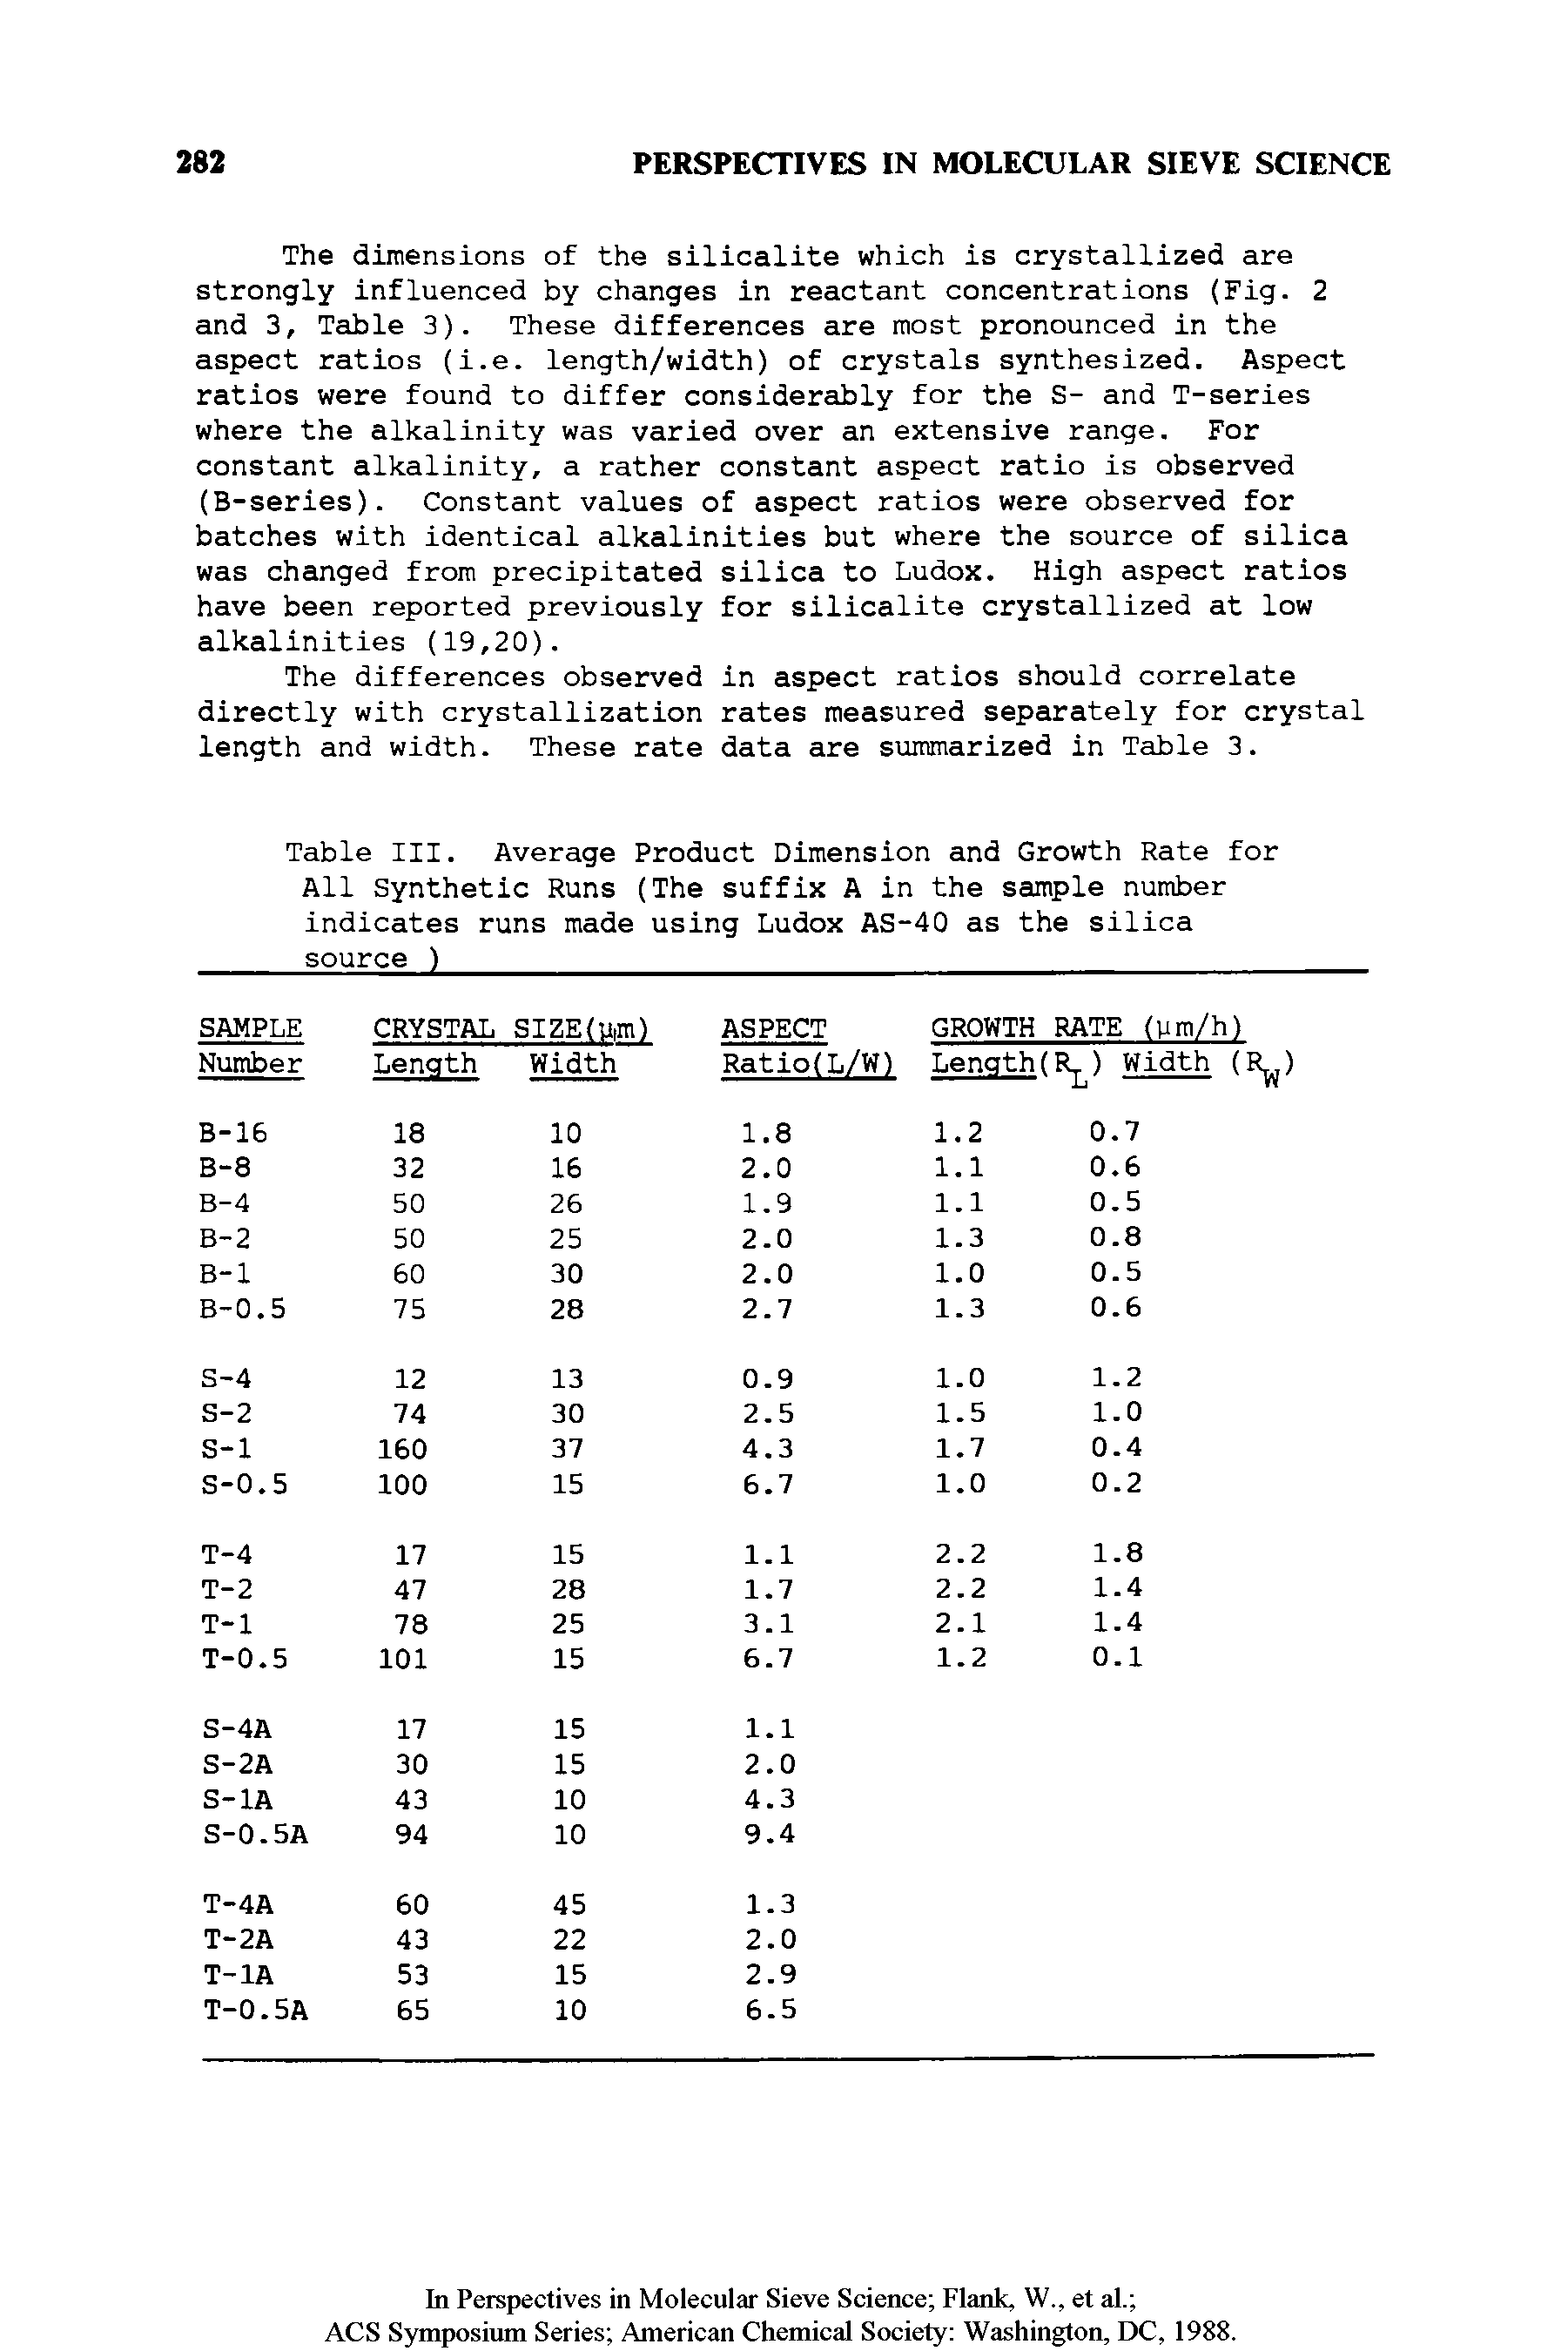 Table III. Average Product Dimension and Growth Rate for All Synthetic Runs (The suffix A in the sample number indicates runs made using Ludox AS-40 as the silica source ) ...